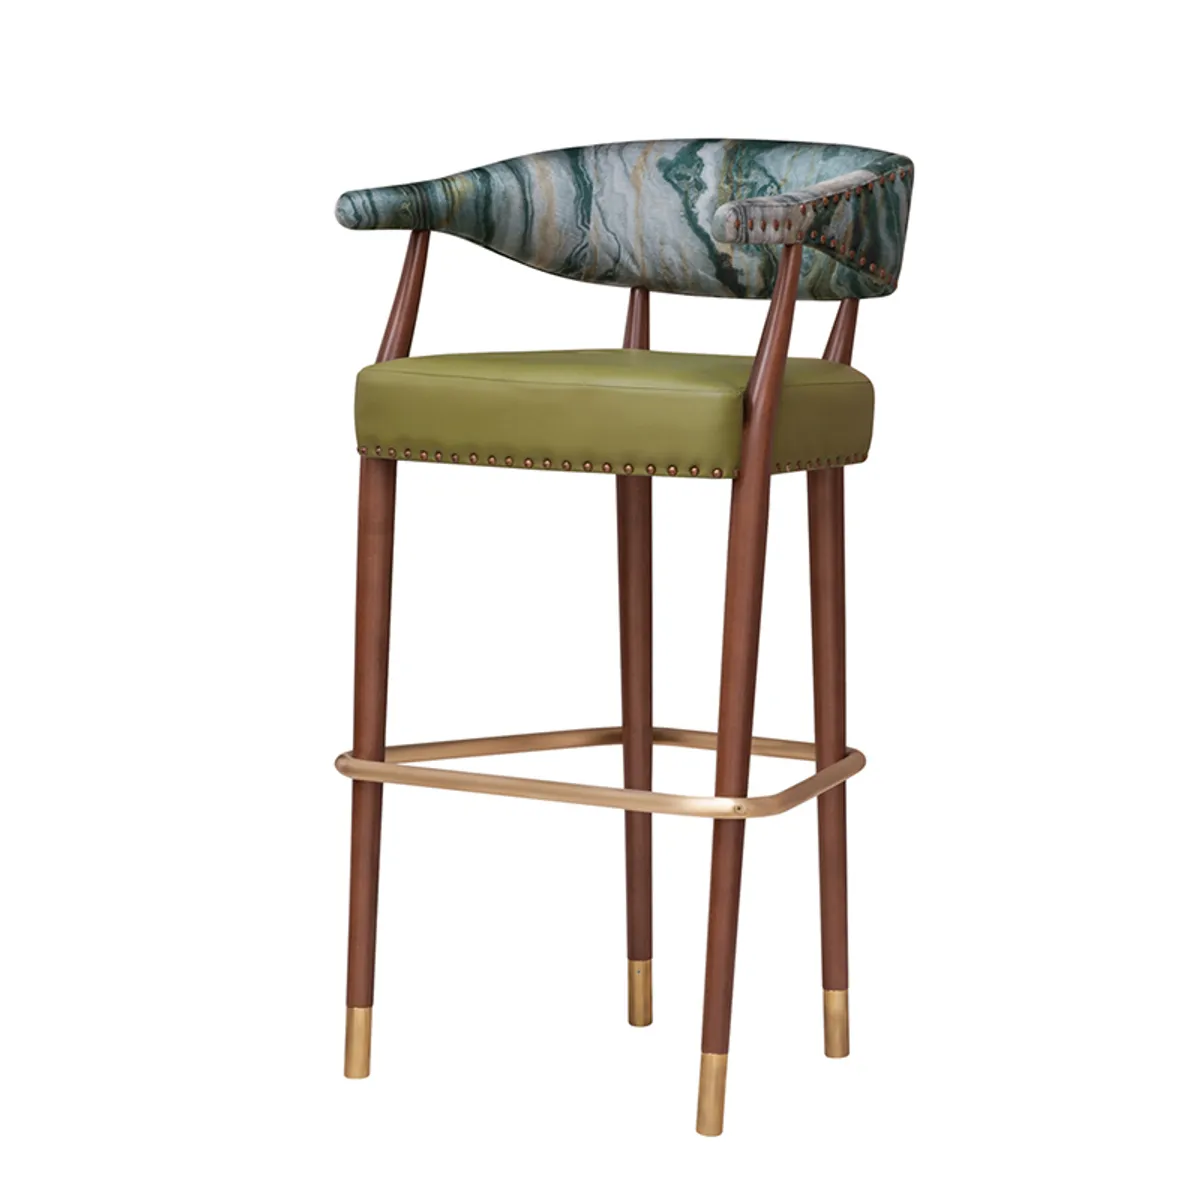 Clara Bar Stool Furniture For Bars With Stud Detailing And Metal Slipper Cups On Wooden Legs 0987